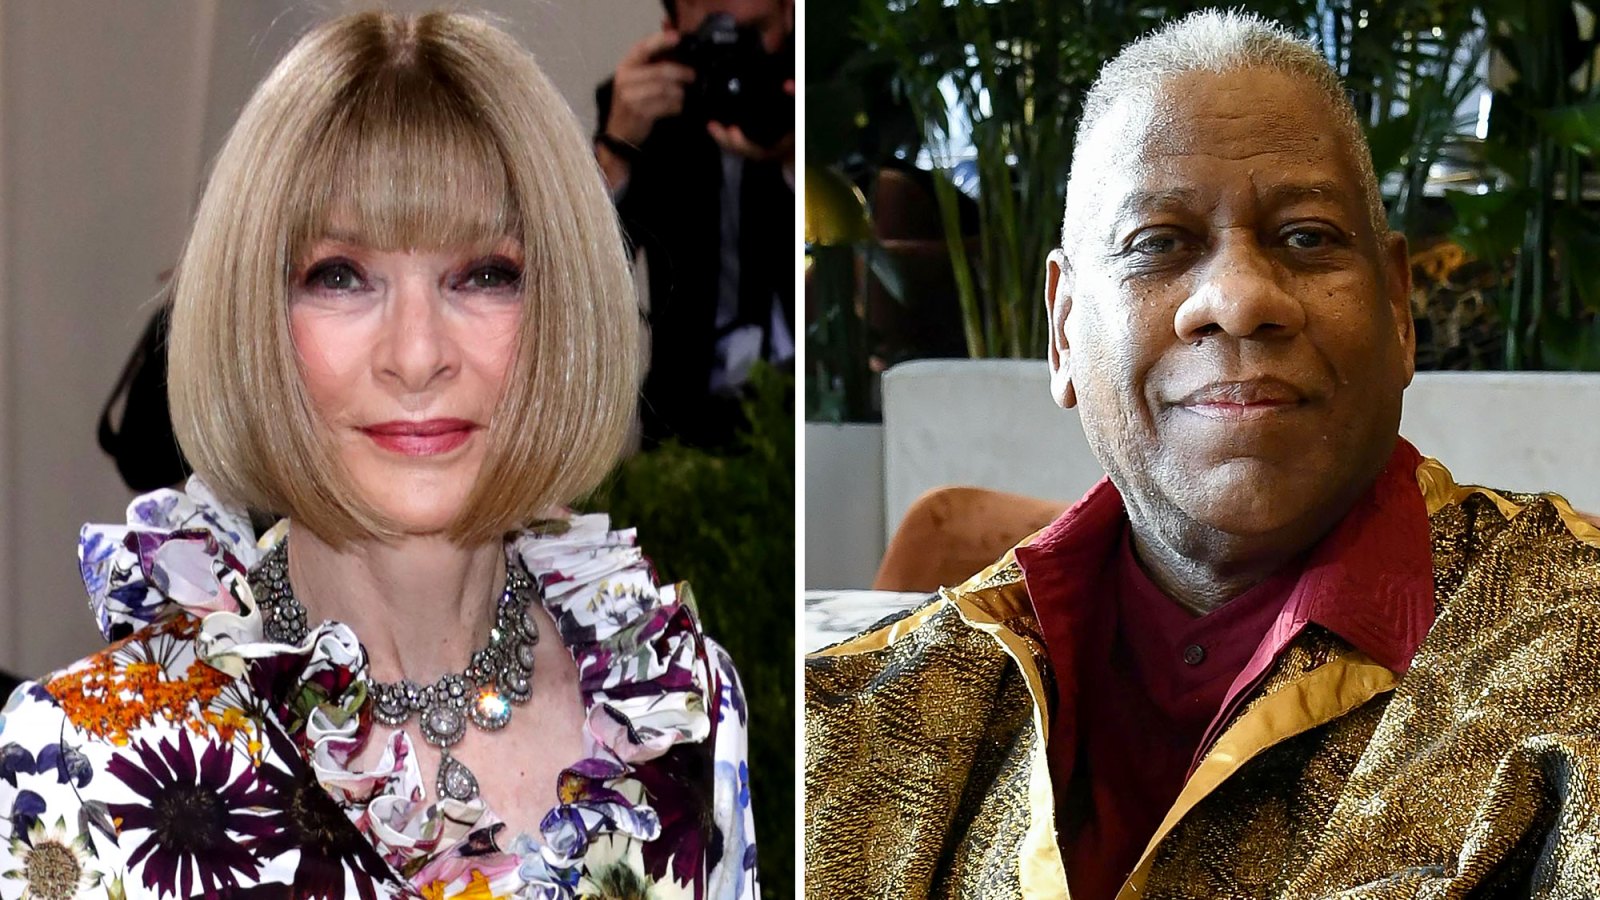 Anna Wintour Acknowledges Andre Leon Talley Feud in Tribute After His Death